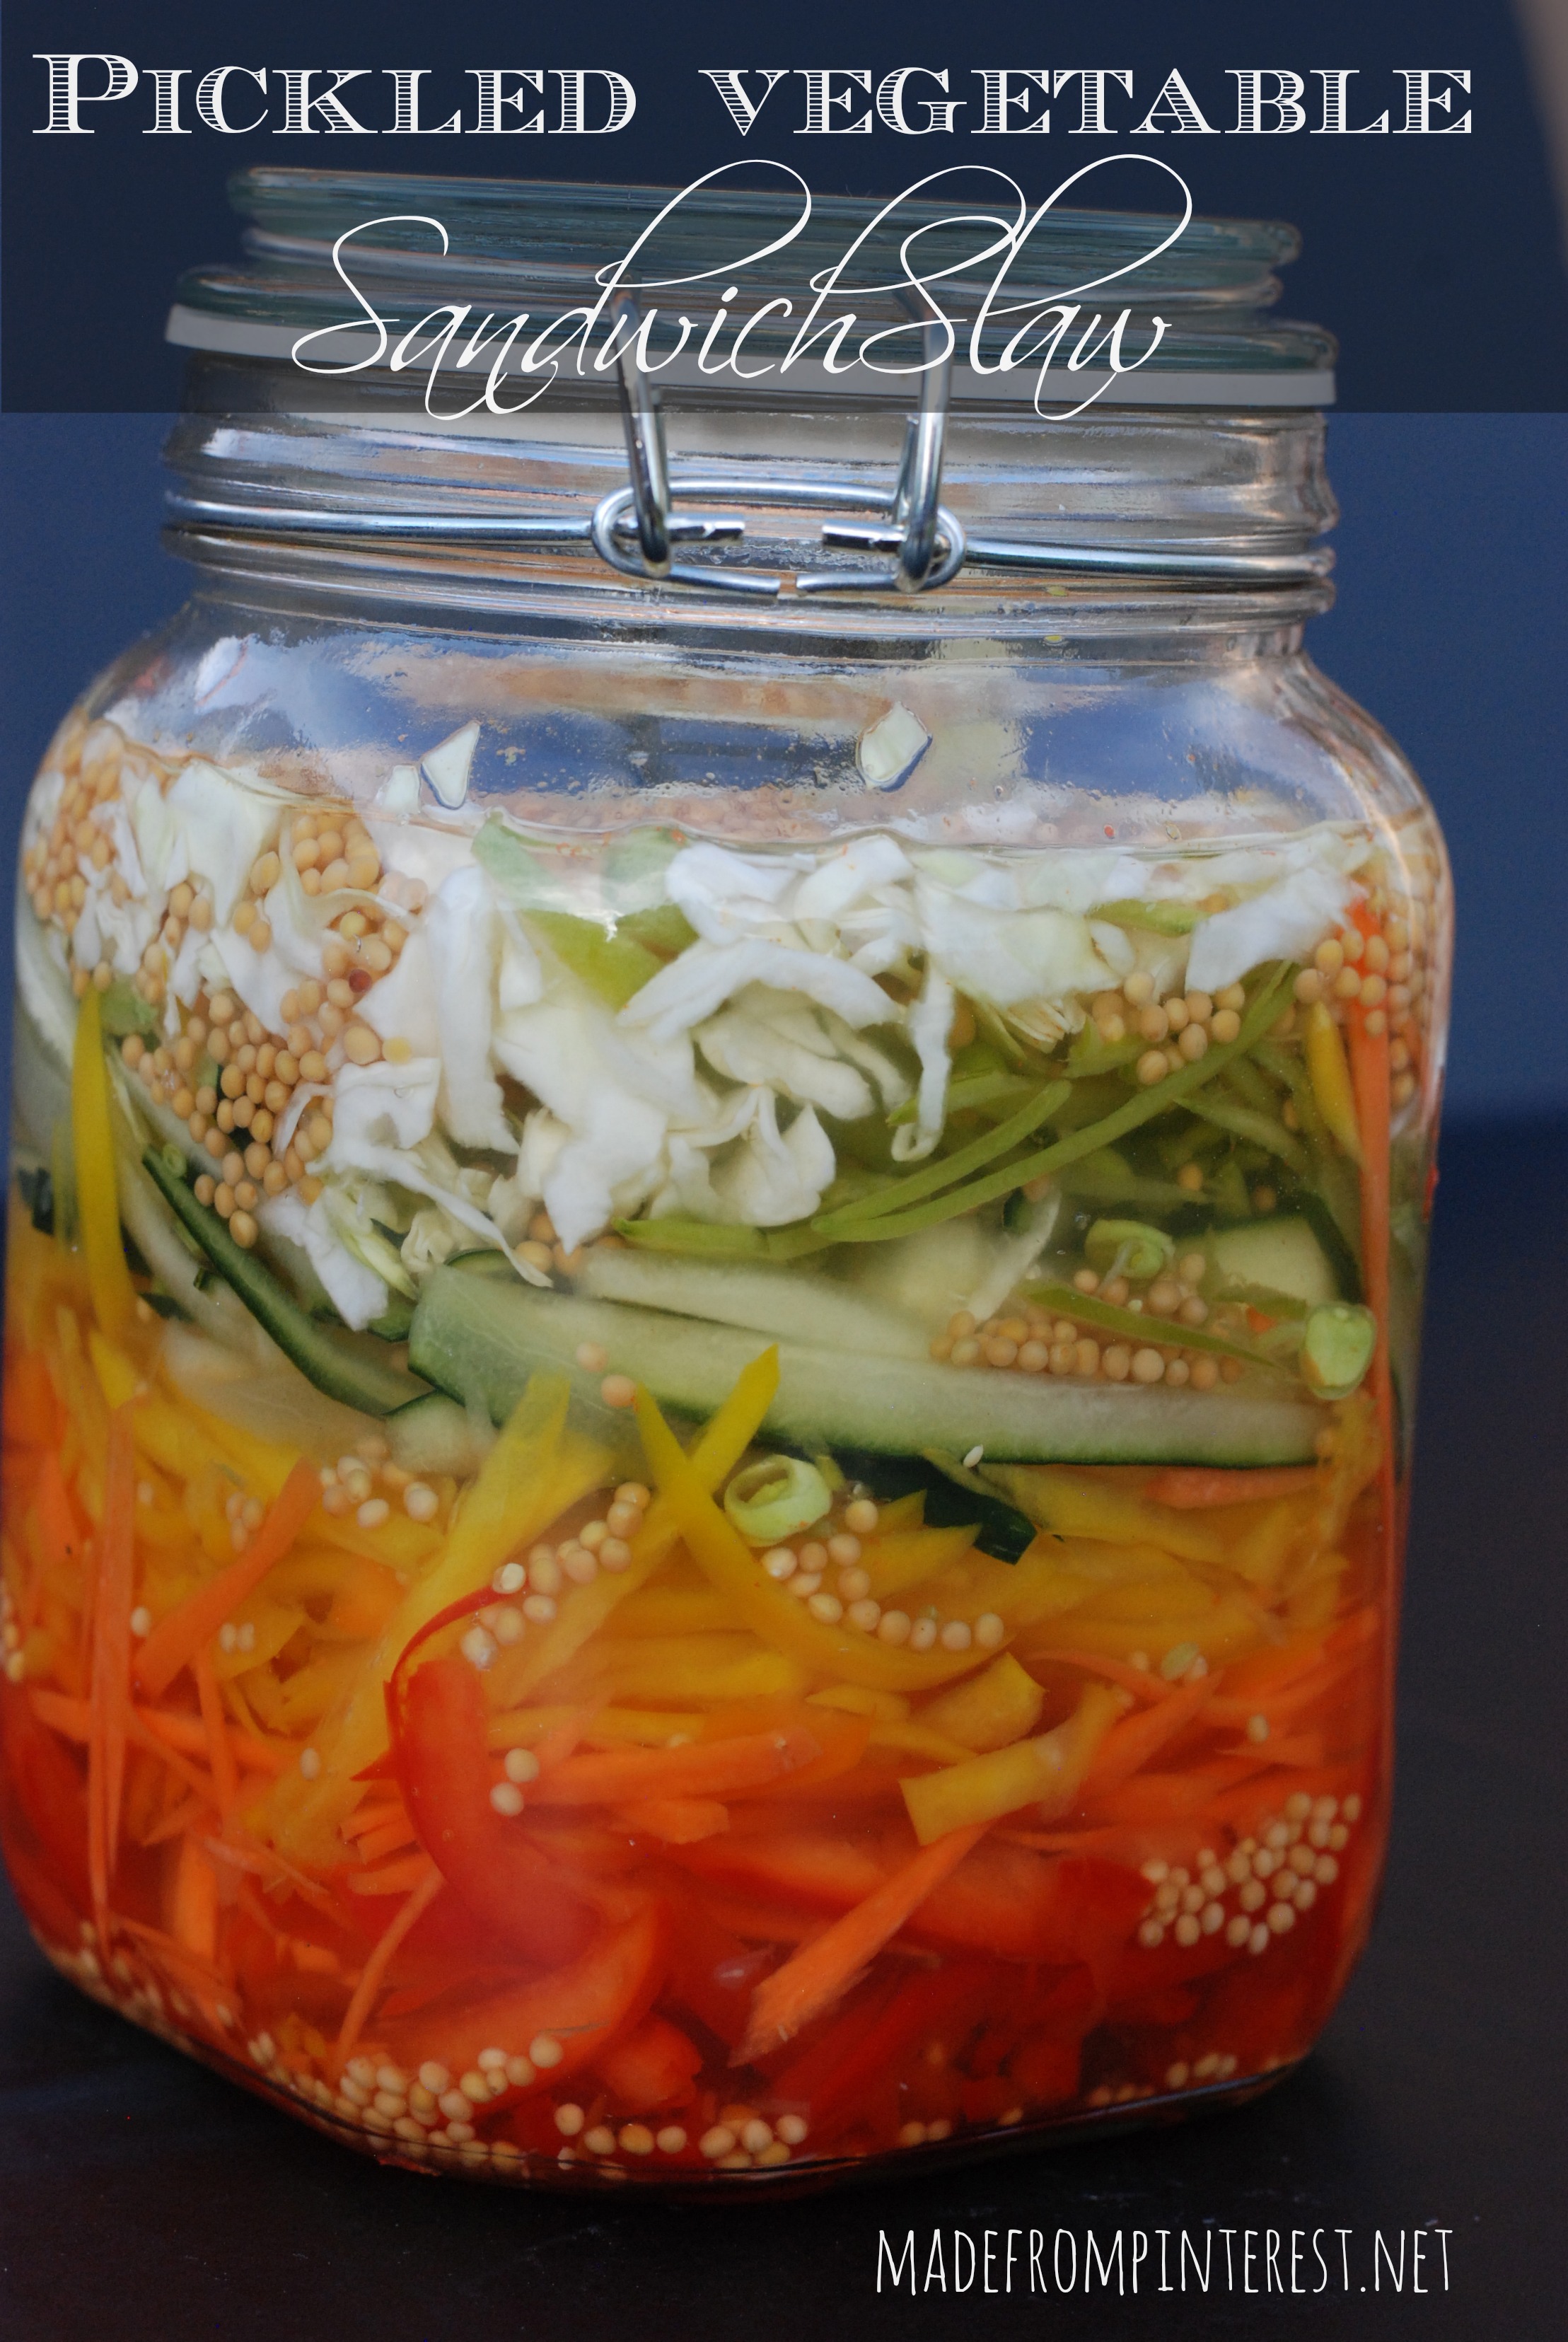 Are you ready to make some killer sandwiches? Check out this Pickled Vegetable Sandwich Slaw. You won't regret it. madefrompinterest.net